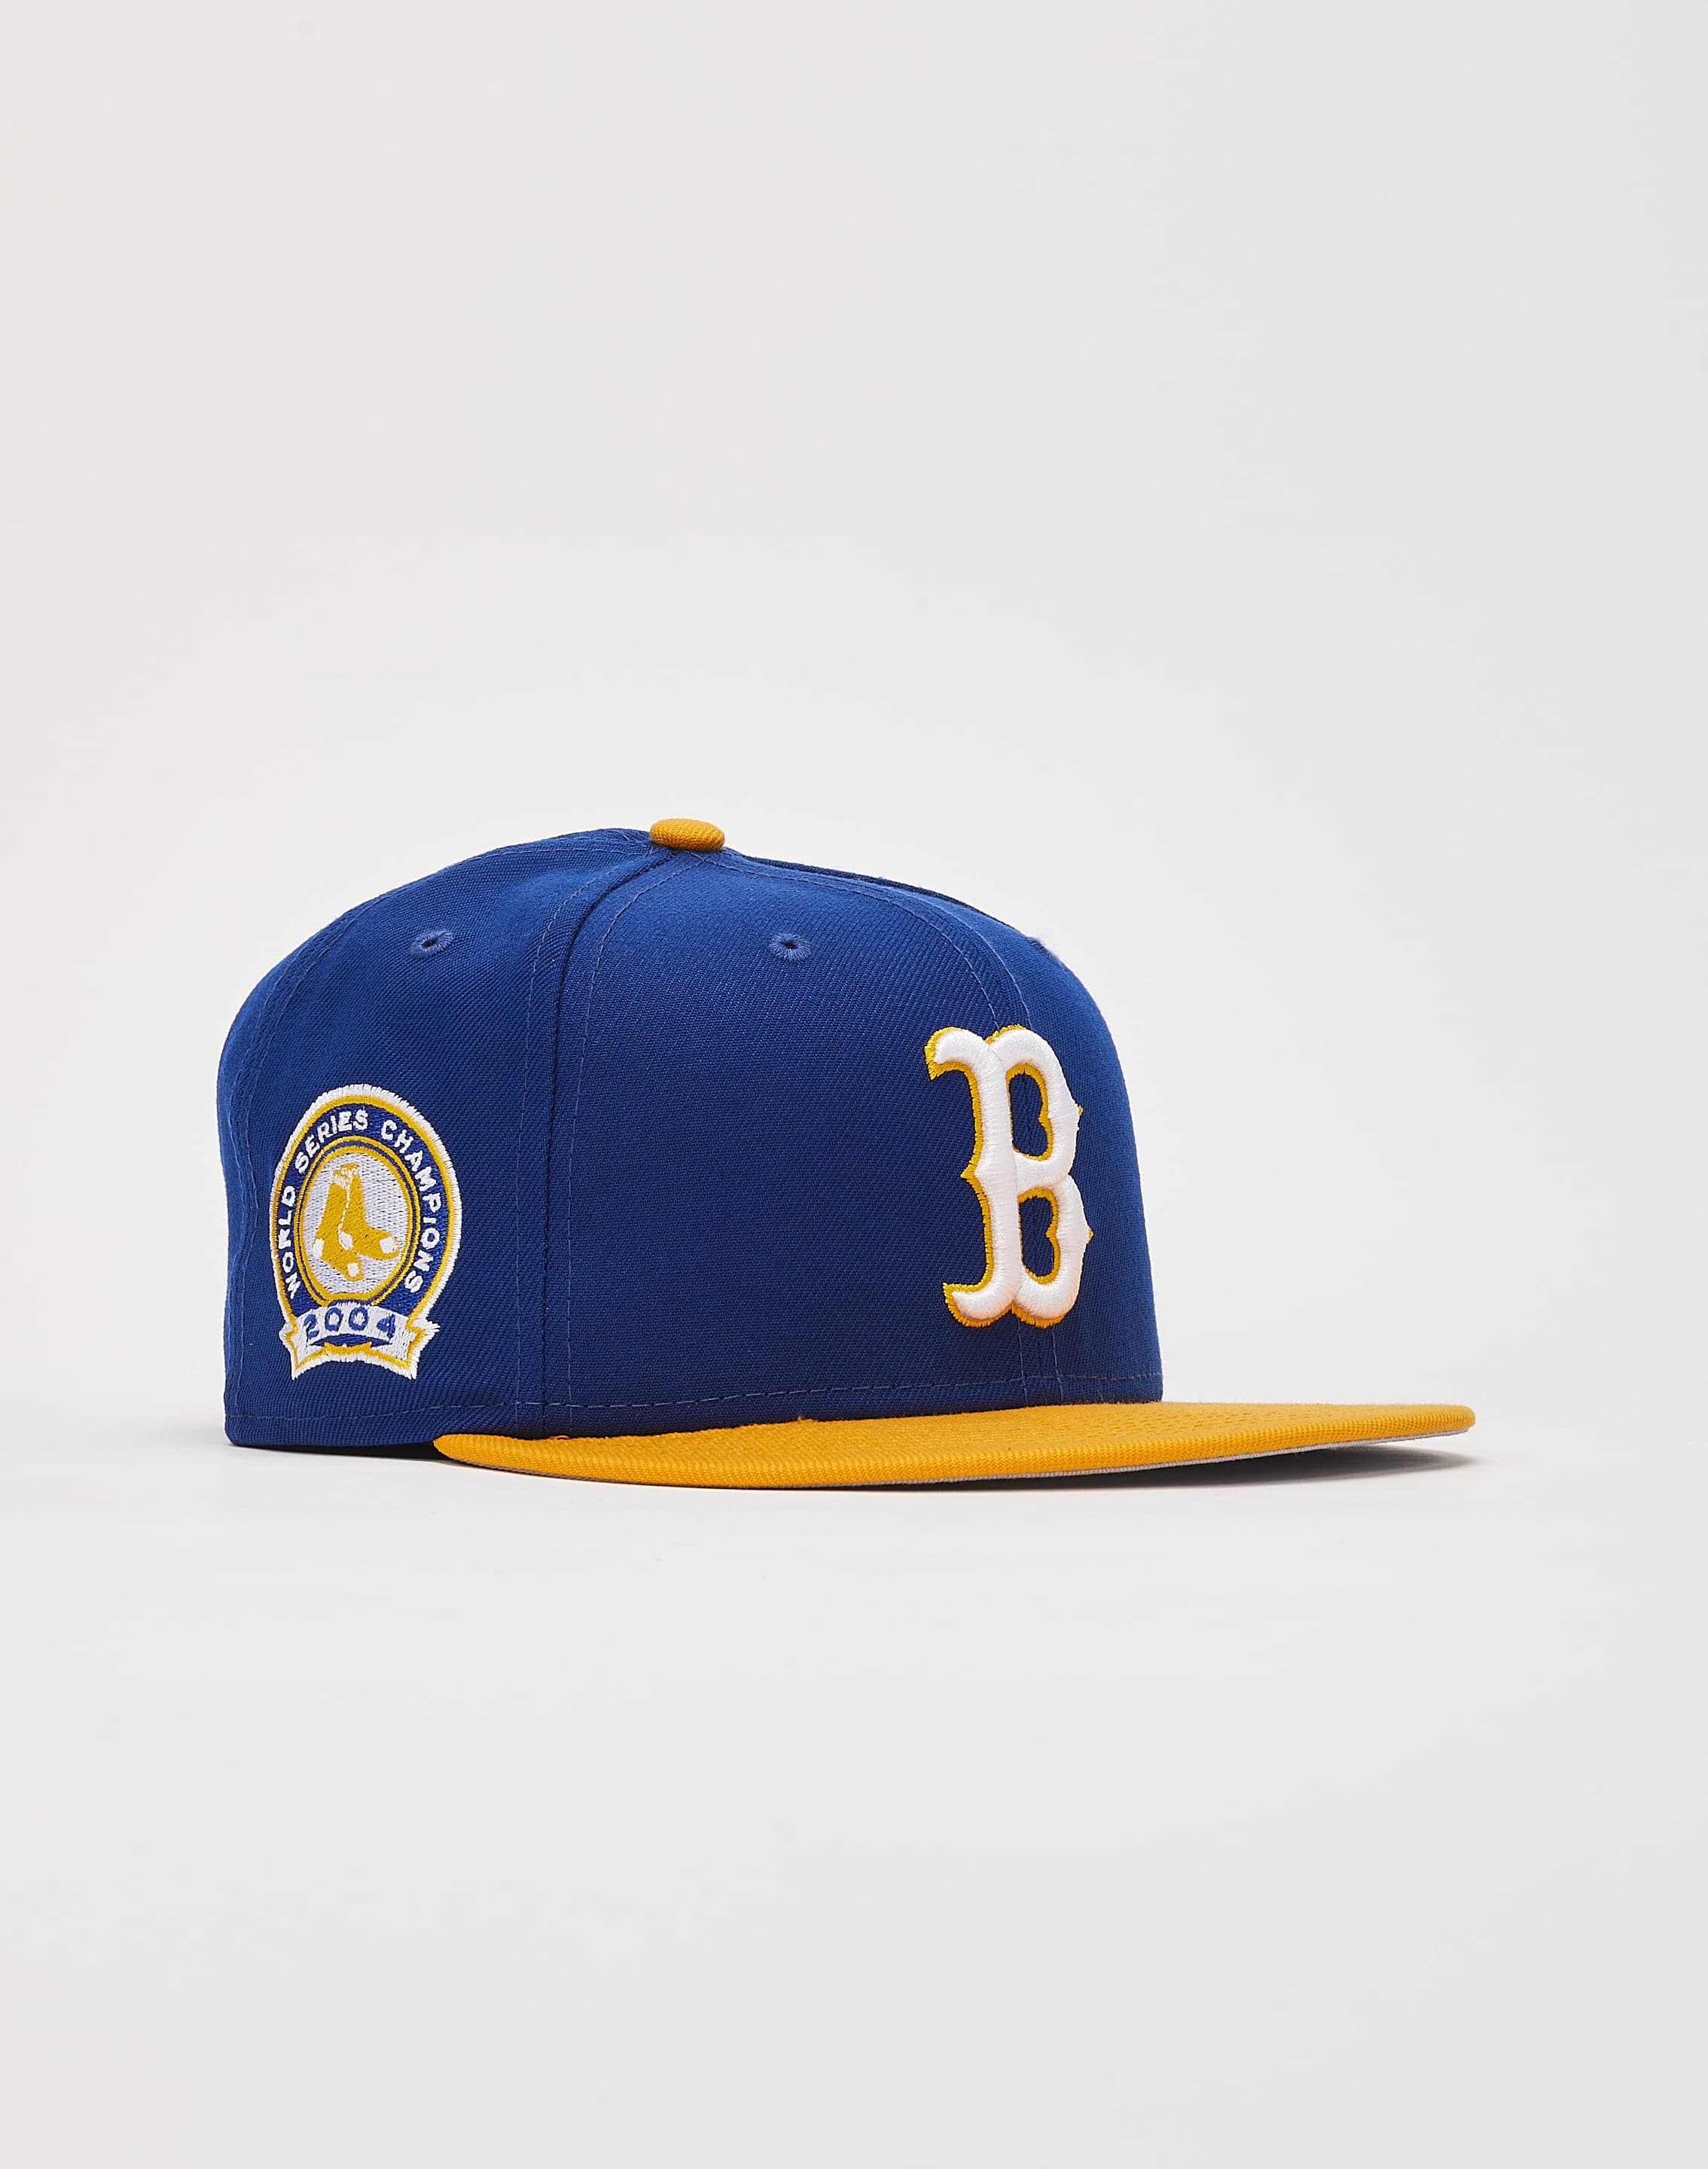 boston red sox yellow and blue hat